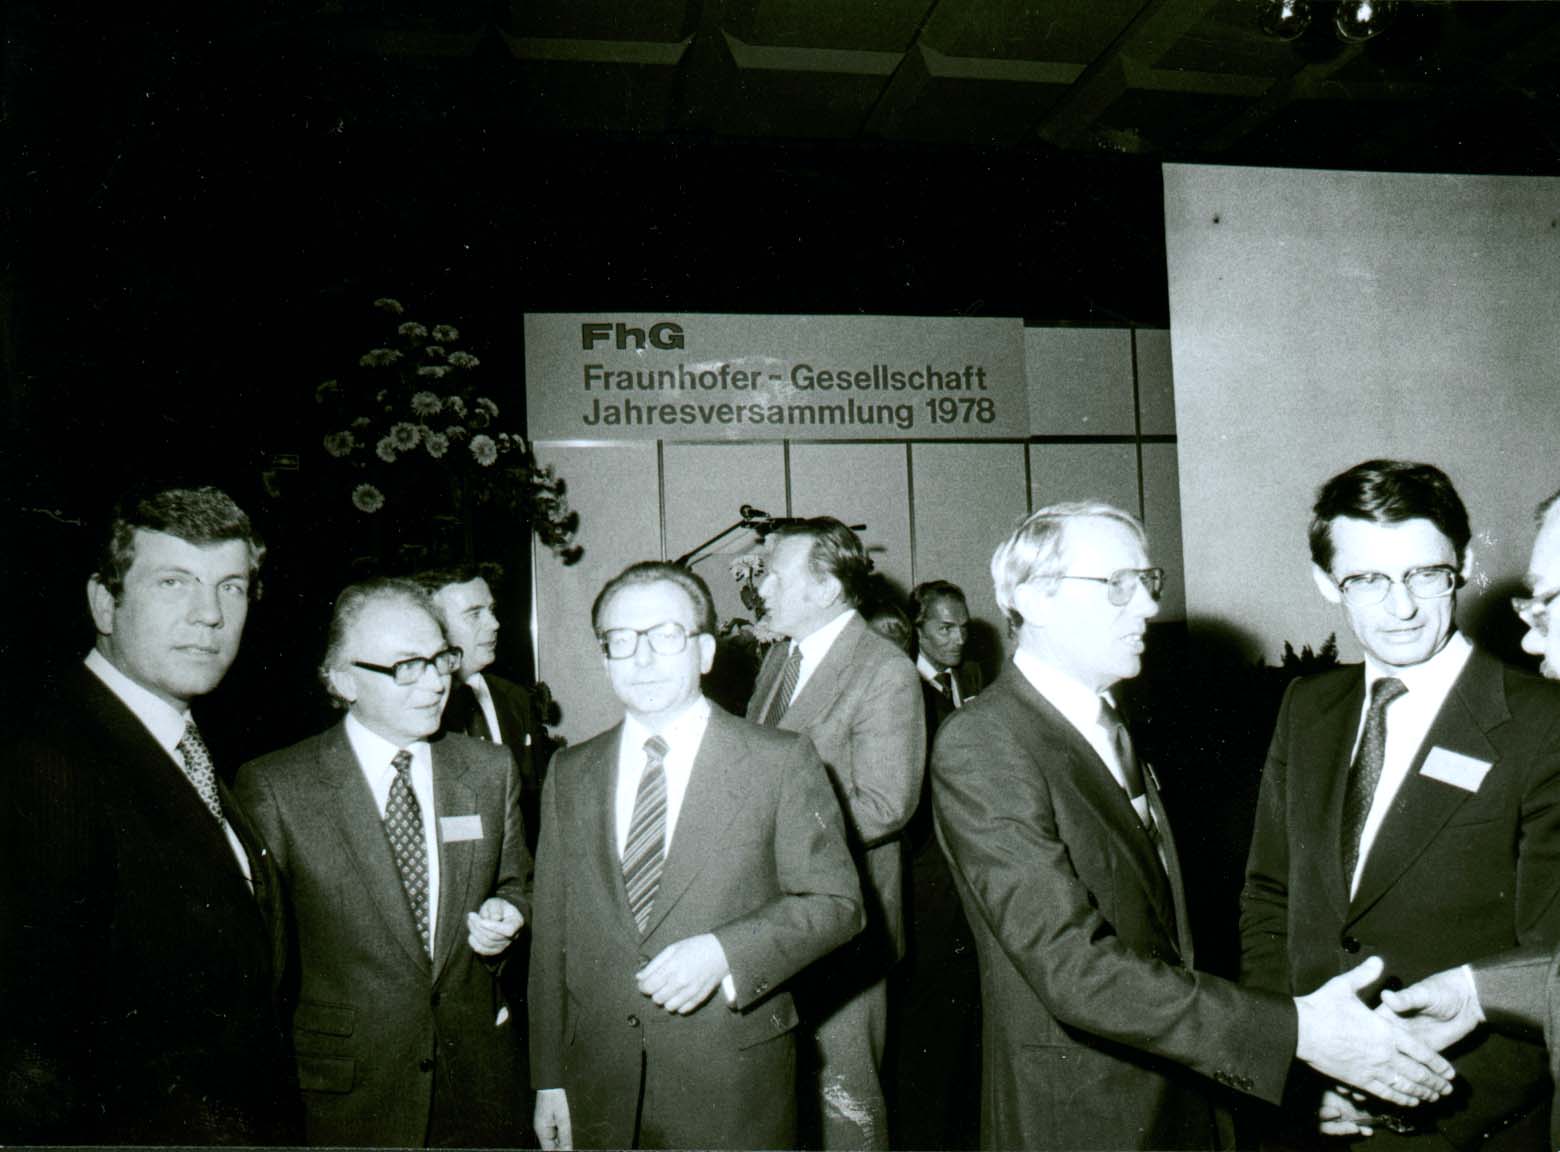 Annual Conference 1978 - Federal Minister for Research and Technology Volker Hauff, Fraunhofer President Heinz Keller, Prime Minister of Baden-Württemberg Lothar Späth, Fraunhofer Board Members Eberhard Schlephorst and Hans-Ulrich Wiese (f.l.t.r.)